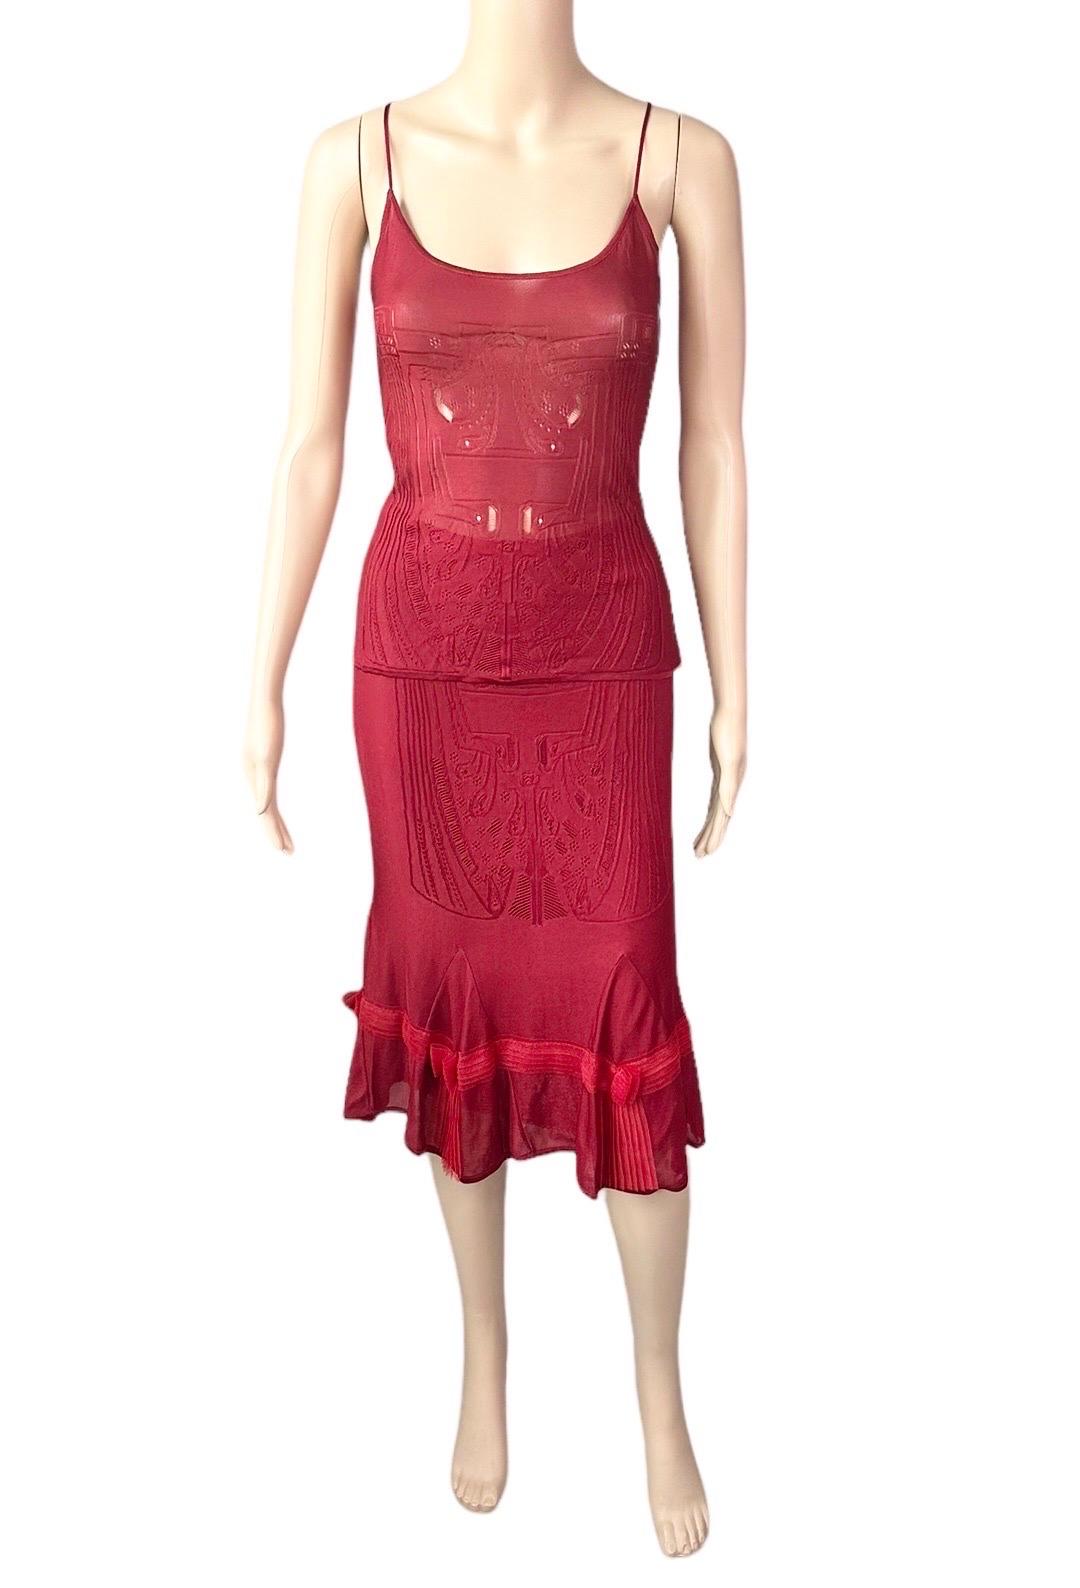 Women's John Galliano F/W 2004 Open Knit Top and Skirt 2 Piece Set Ensemble For Sale